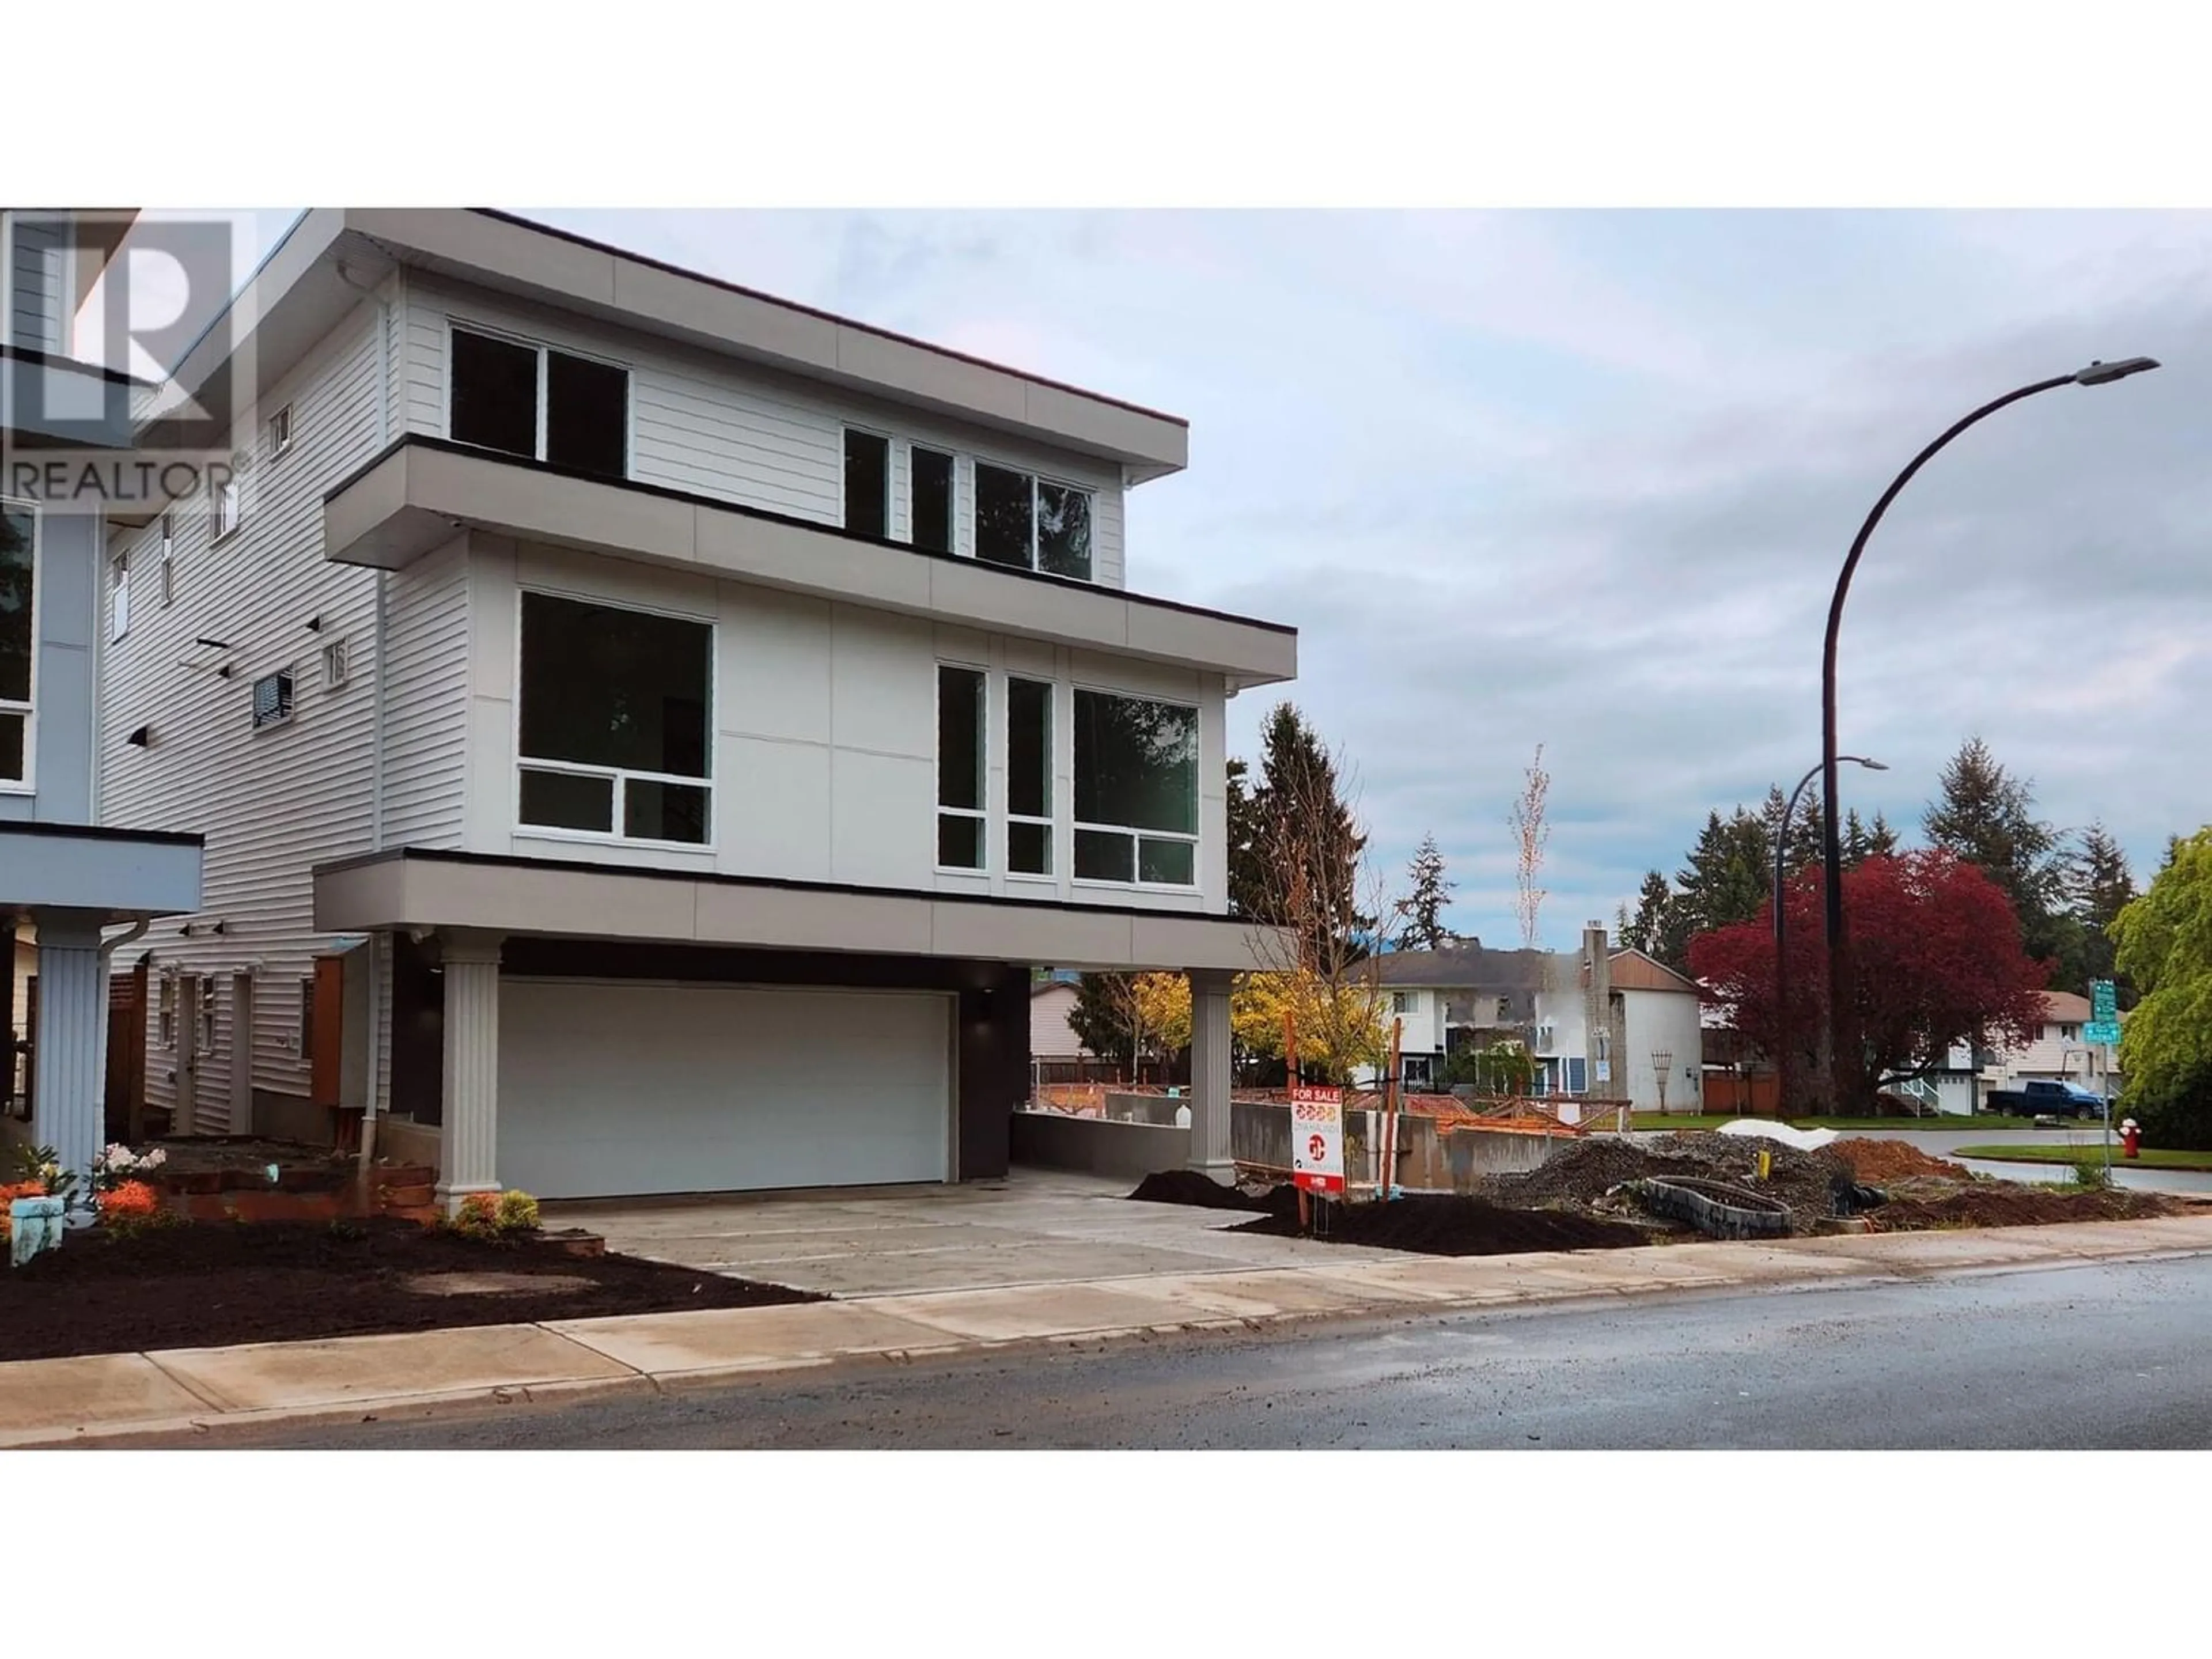 A pic from exterior of the house or condo for 22831 122 AVENUE, Maple Ridge British Columbia V2X3Y1